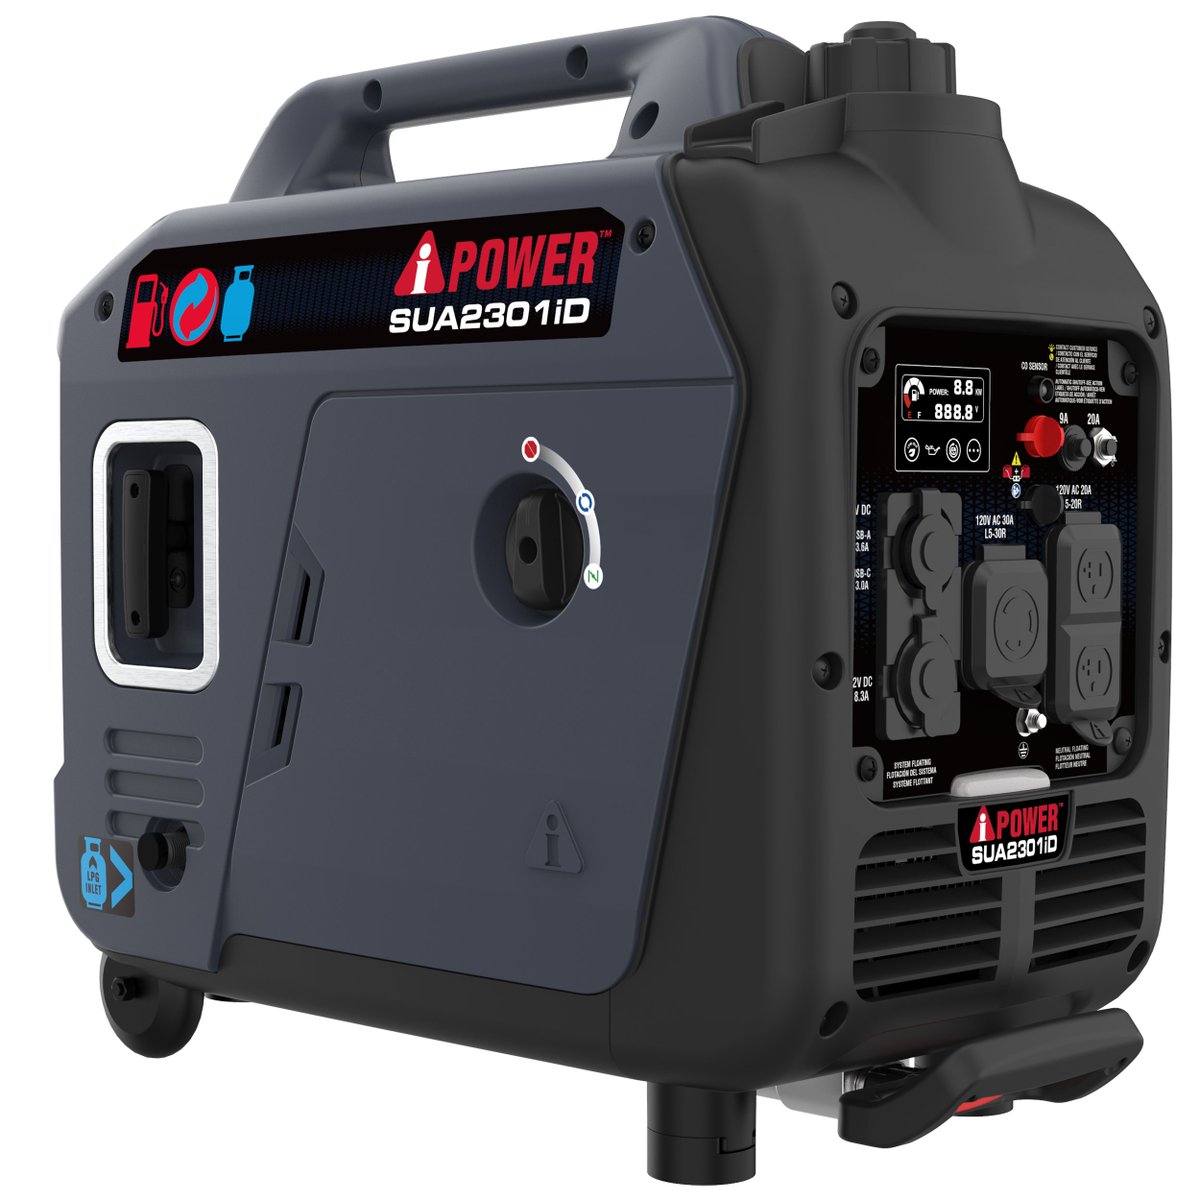 A-iPower’s SUA2301iD Dual Fuel Inverter Generator has low idle technology, extended run time, a built-in LED control panel light, and a digital data center. a-ipower.com/products/sua23… #portablegenerators #generatorpower #inverters #invertergenerators #aipowerup